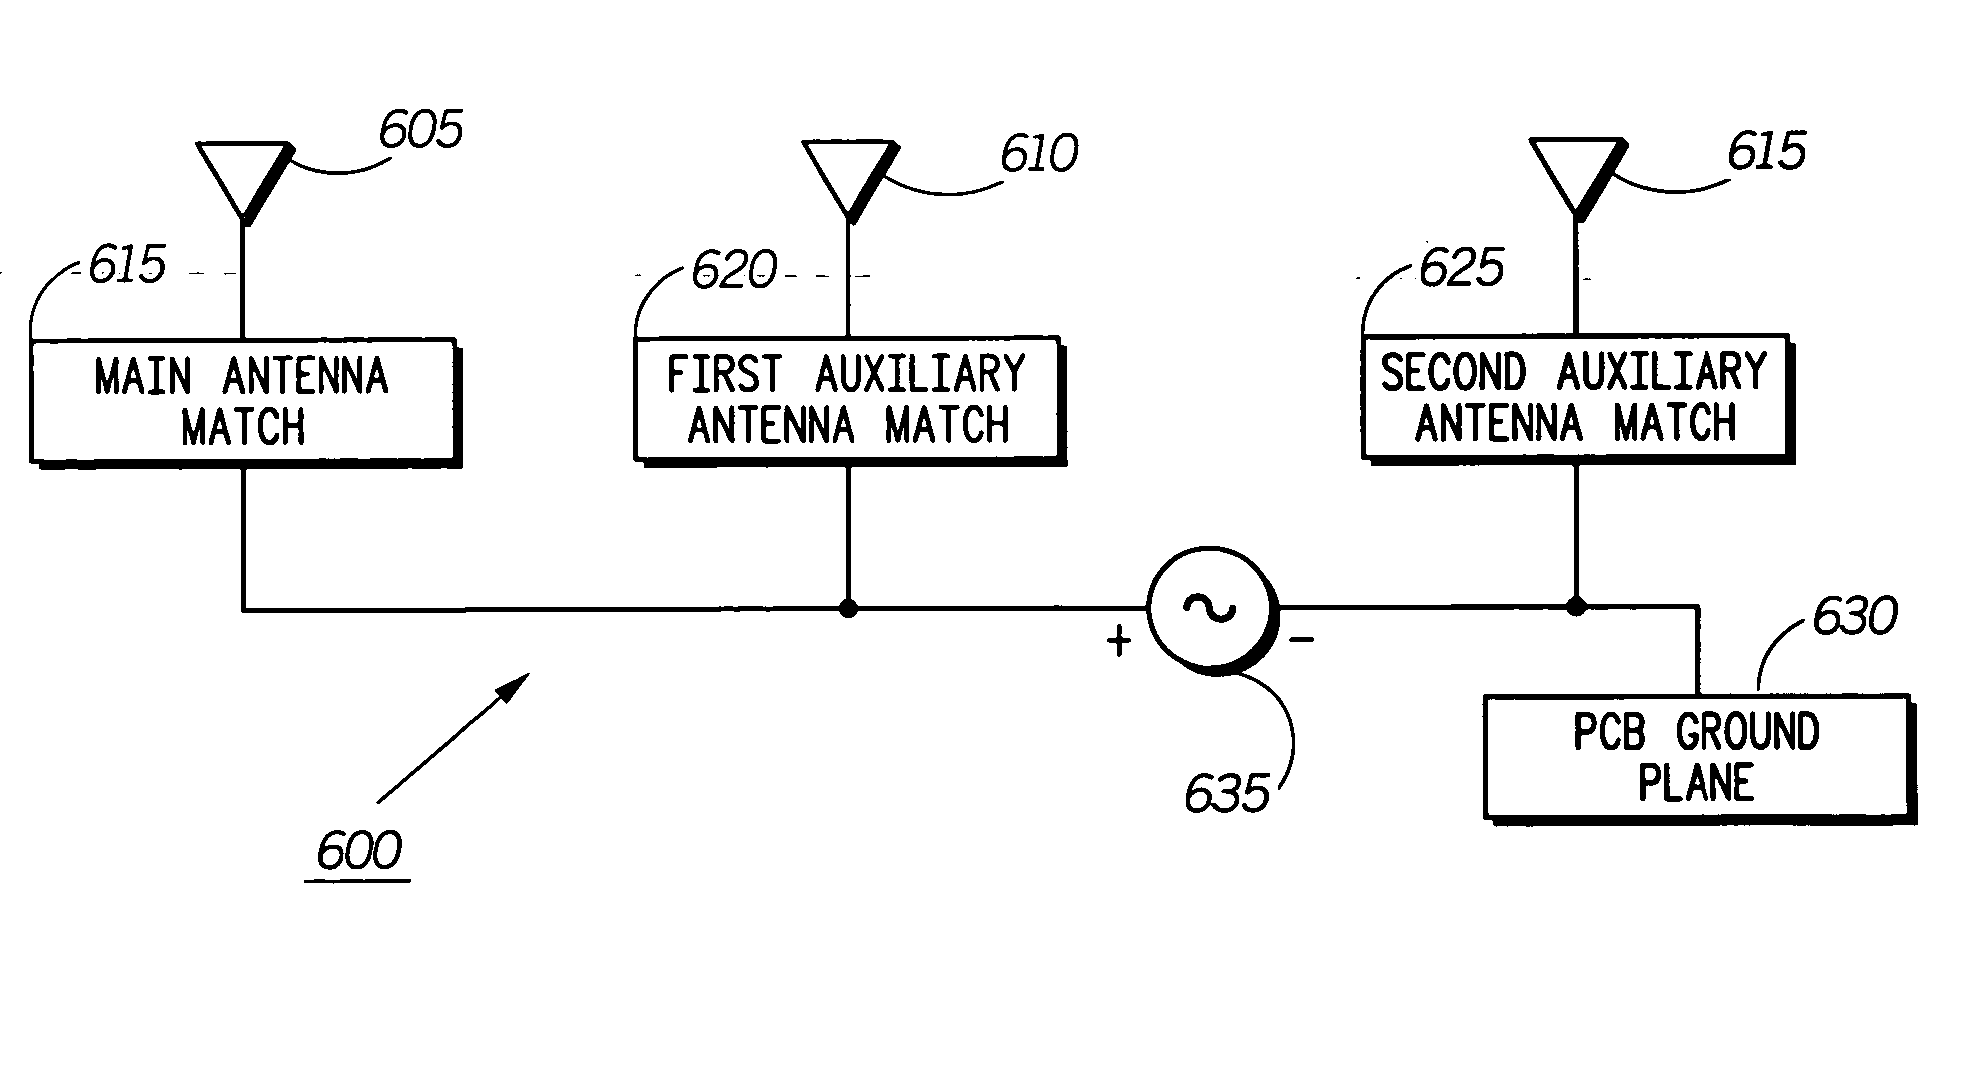 Antenna system for a communication device